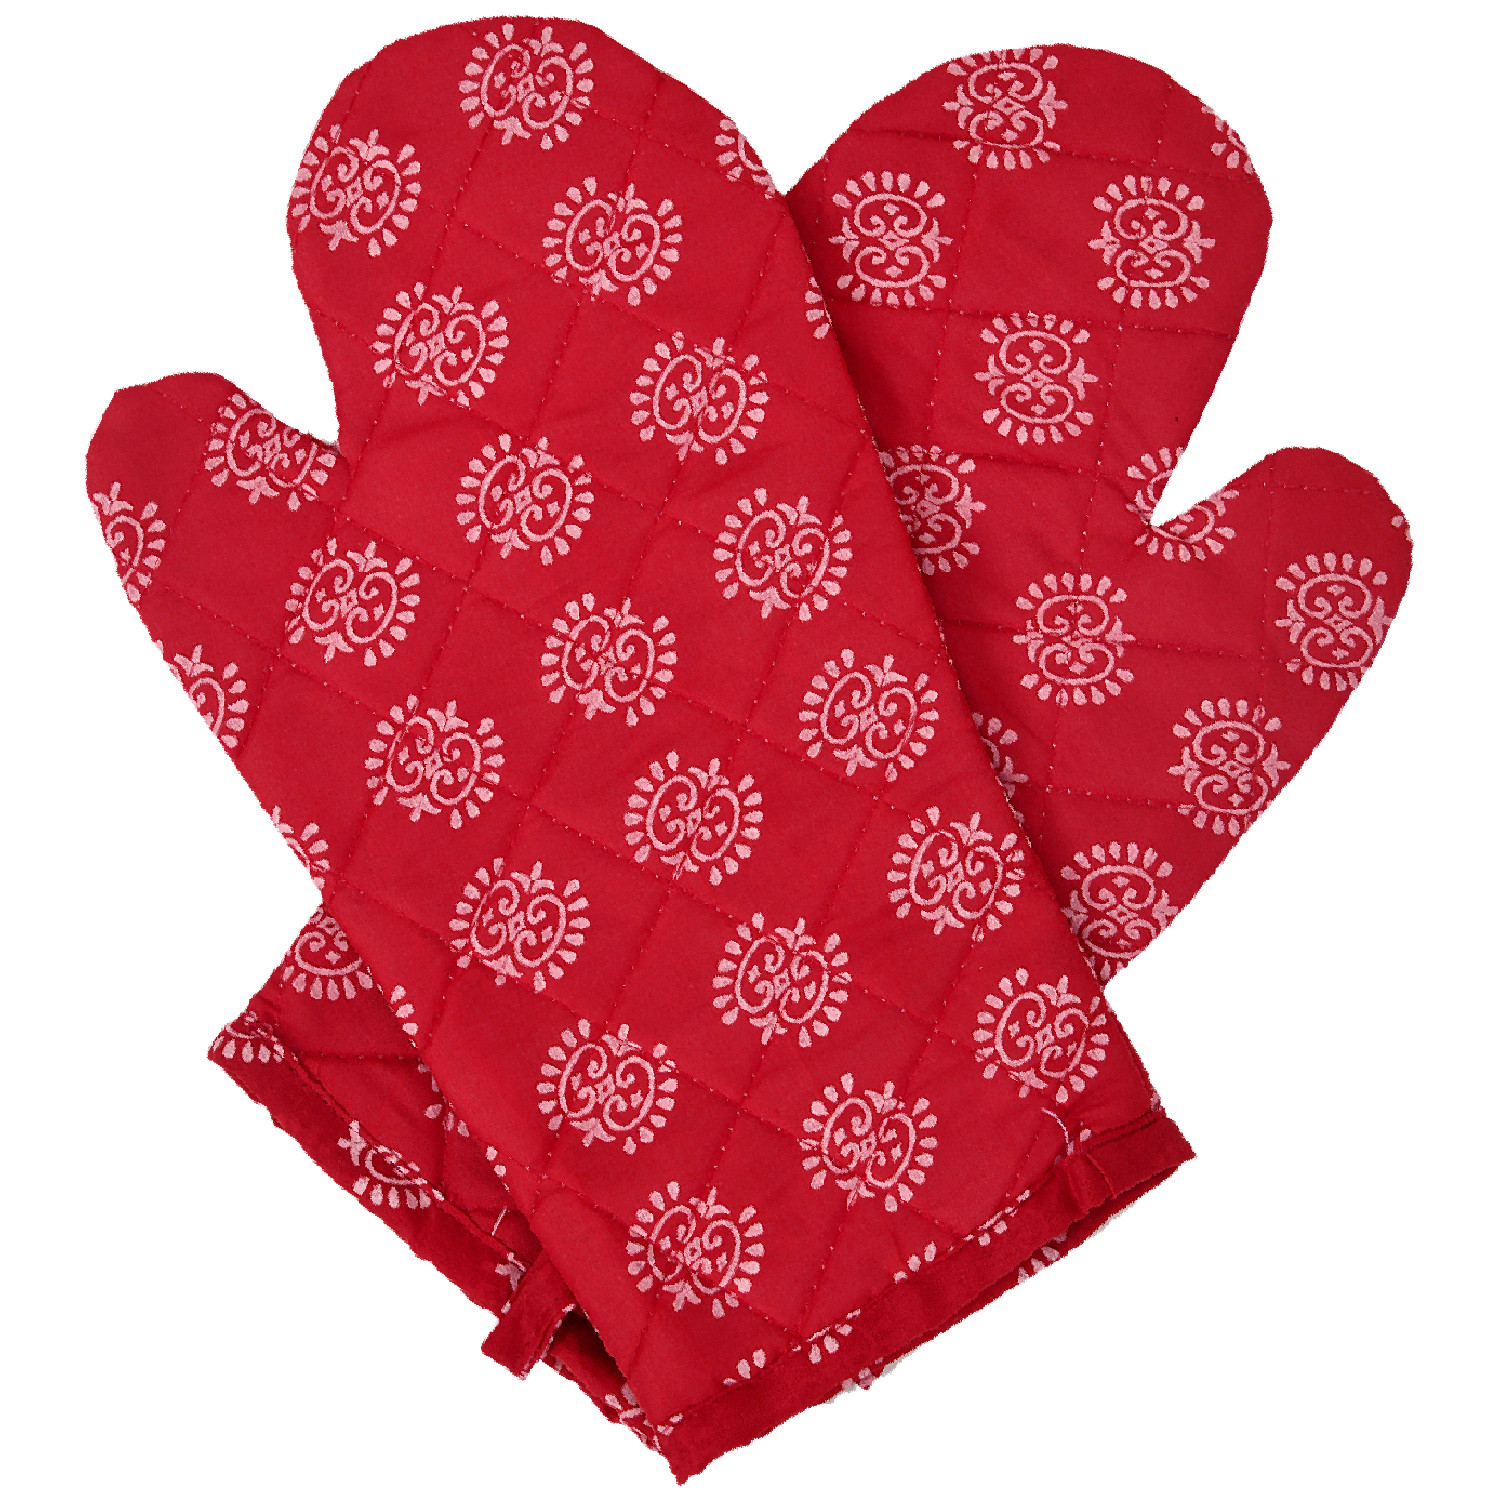 Kuber Industries Oven Mitts | Polyester Microwave Oven Gloves | Printed Hanging Loop Kitchen Oven Gloves | Heat Resistant Gloves For Kitchen | 1 Pair | Maroon